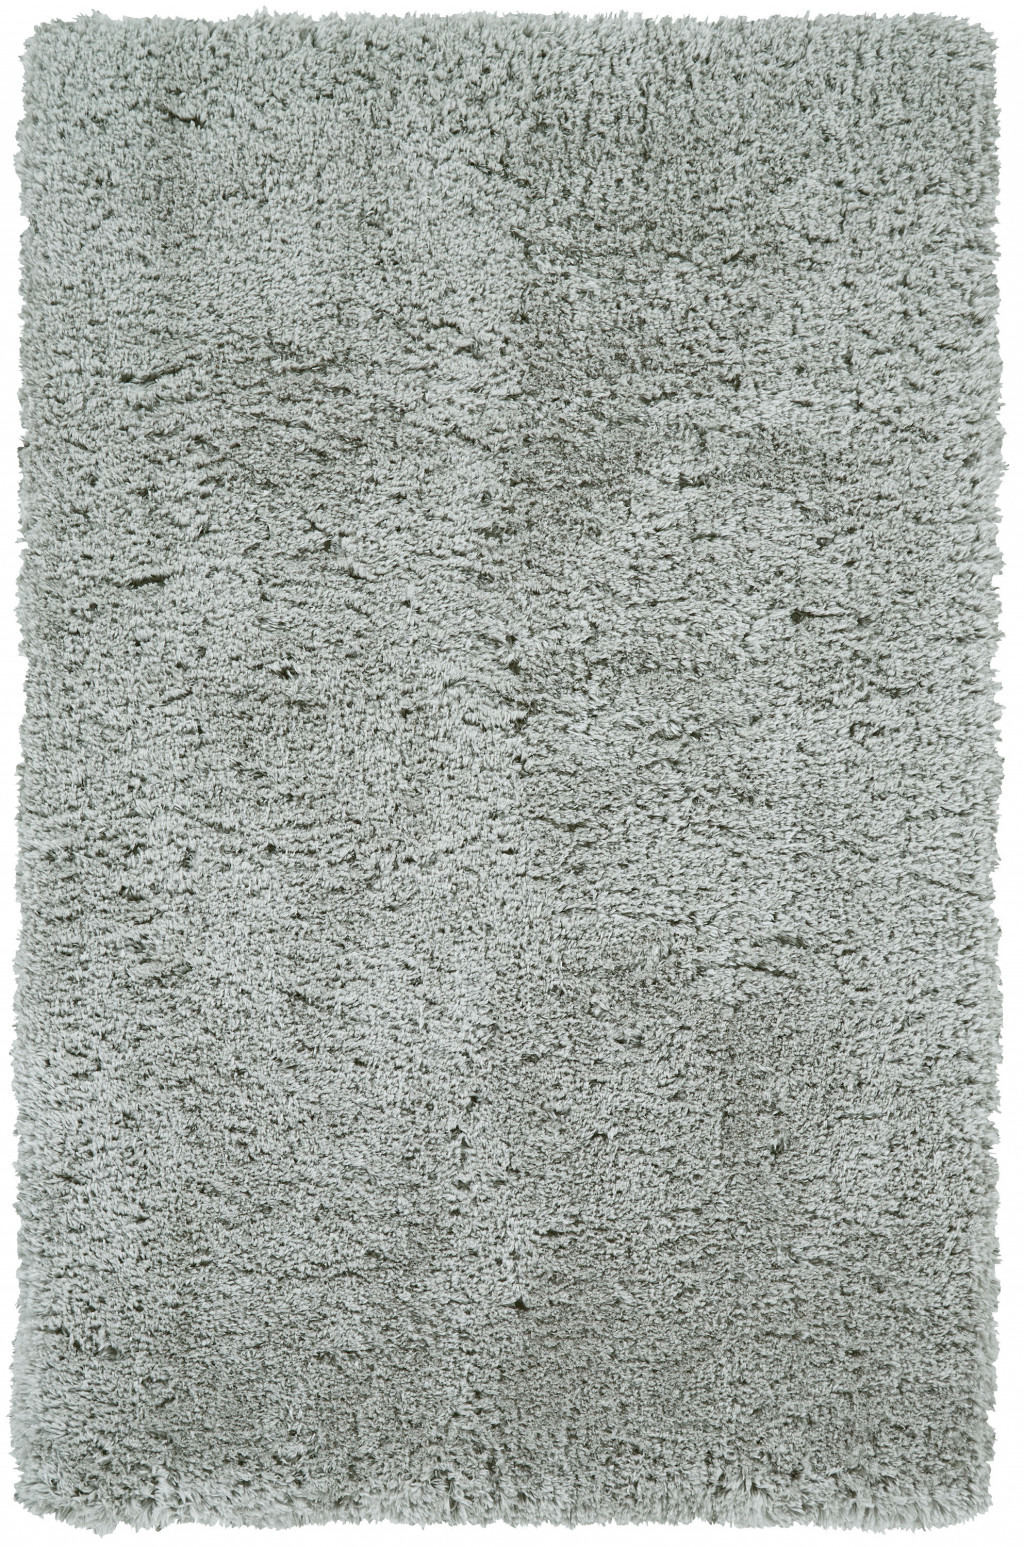 5' X 8' Gray Silver And Taupe Shag Tufted Handmade Stain Resistant Area Rug-511118-1